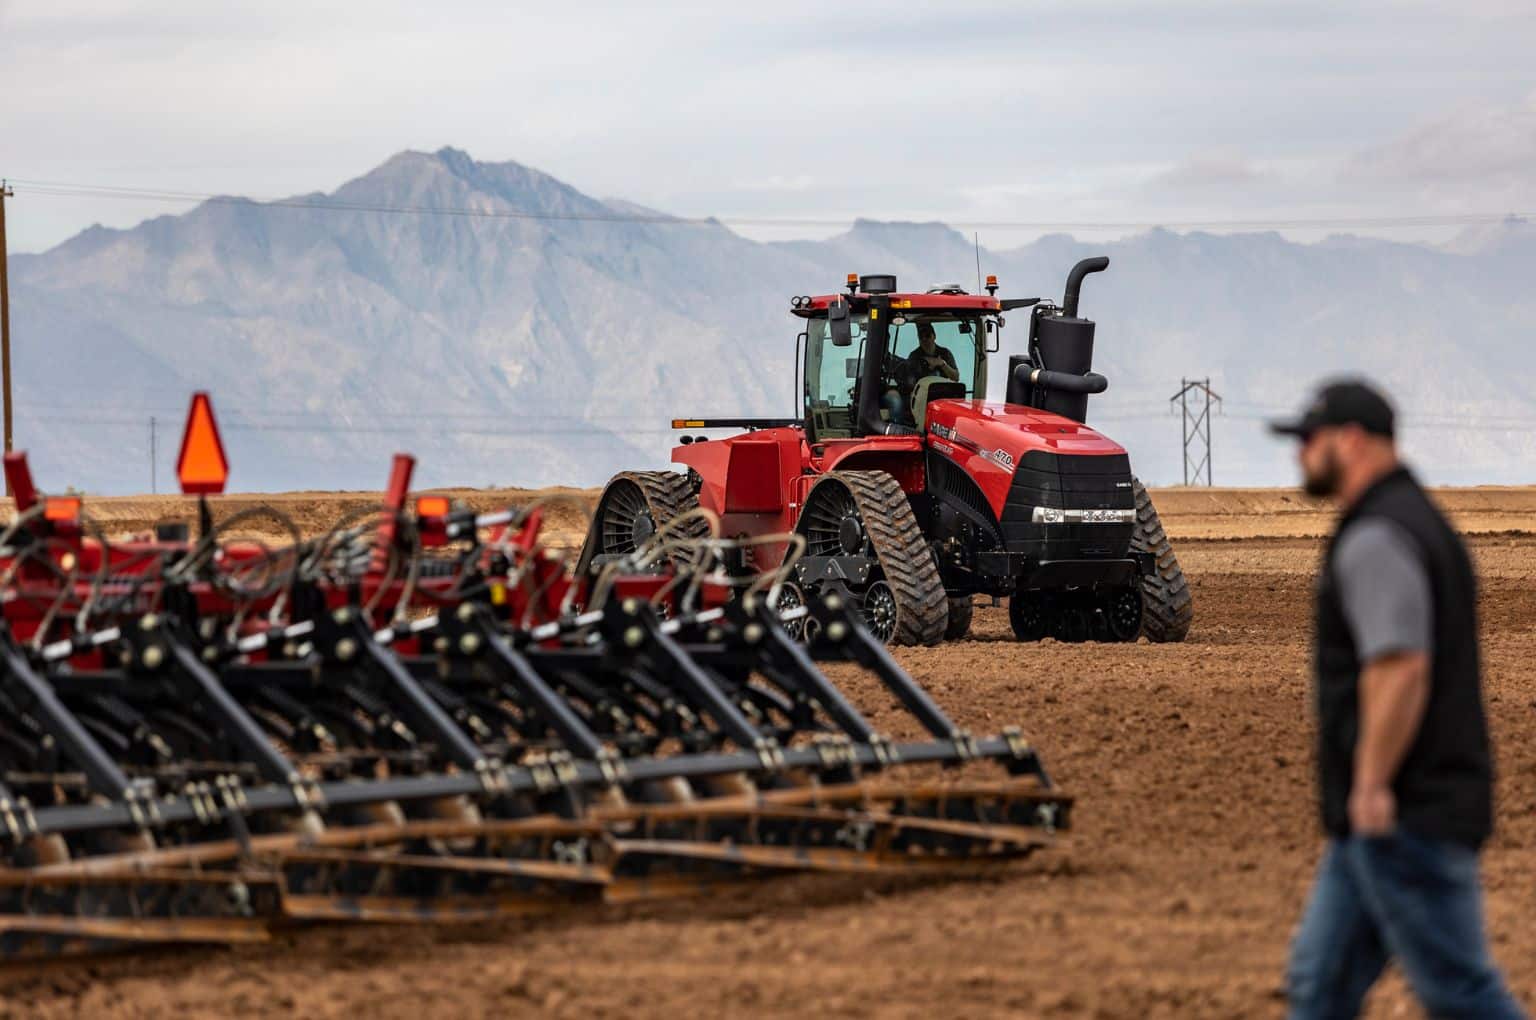 Case IH autonomy and automation